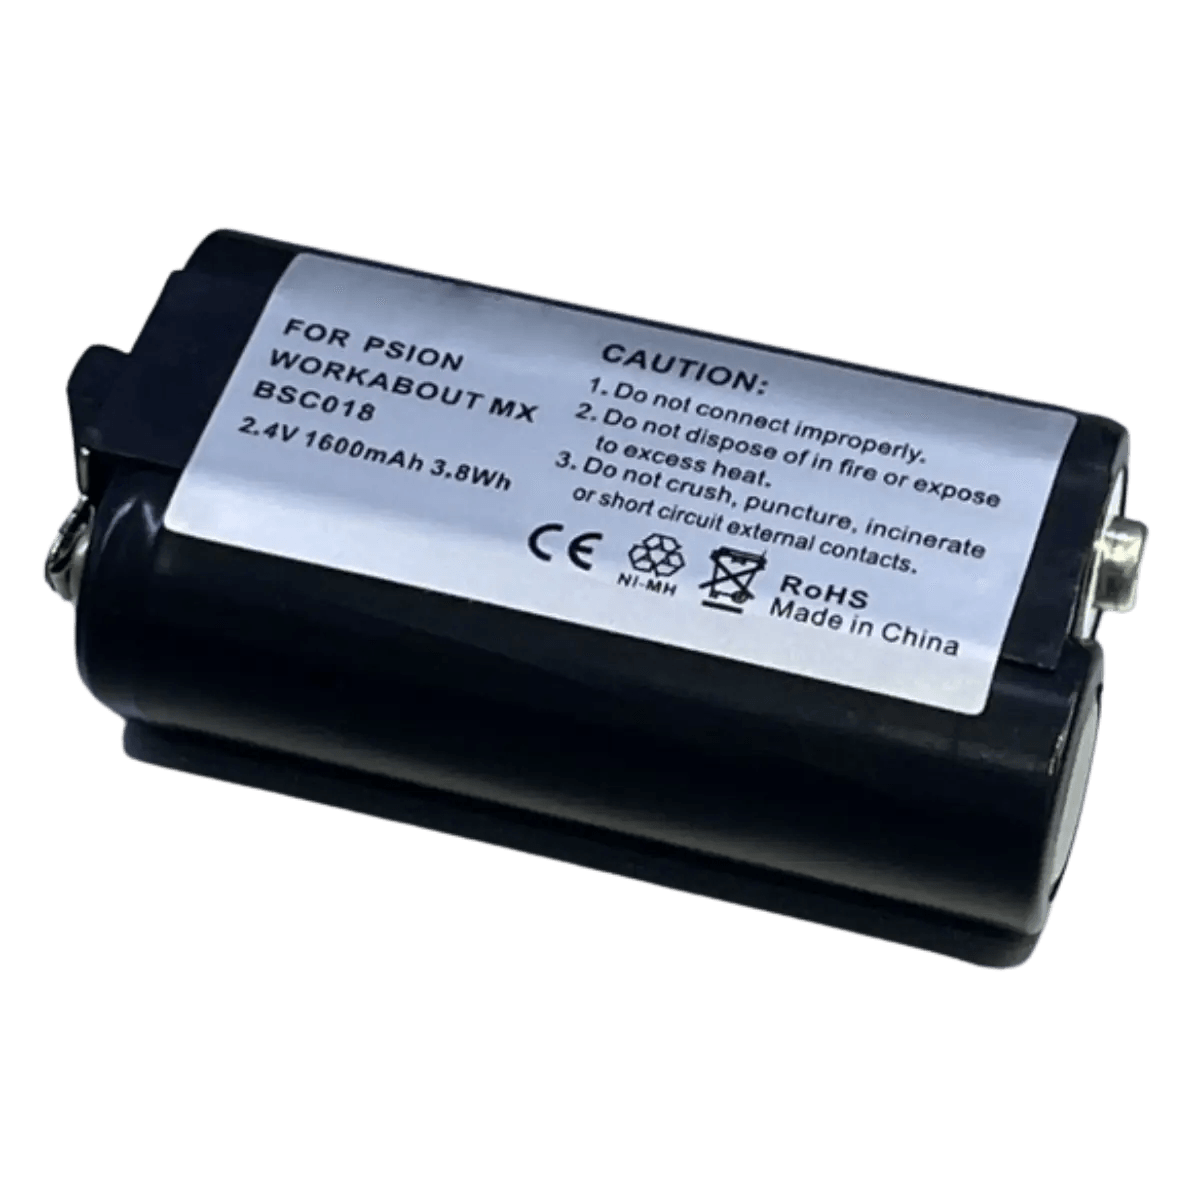 Batterie pour scanner Psion Workabout MX, RF